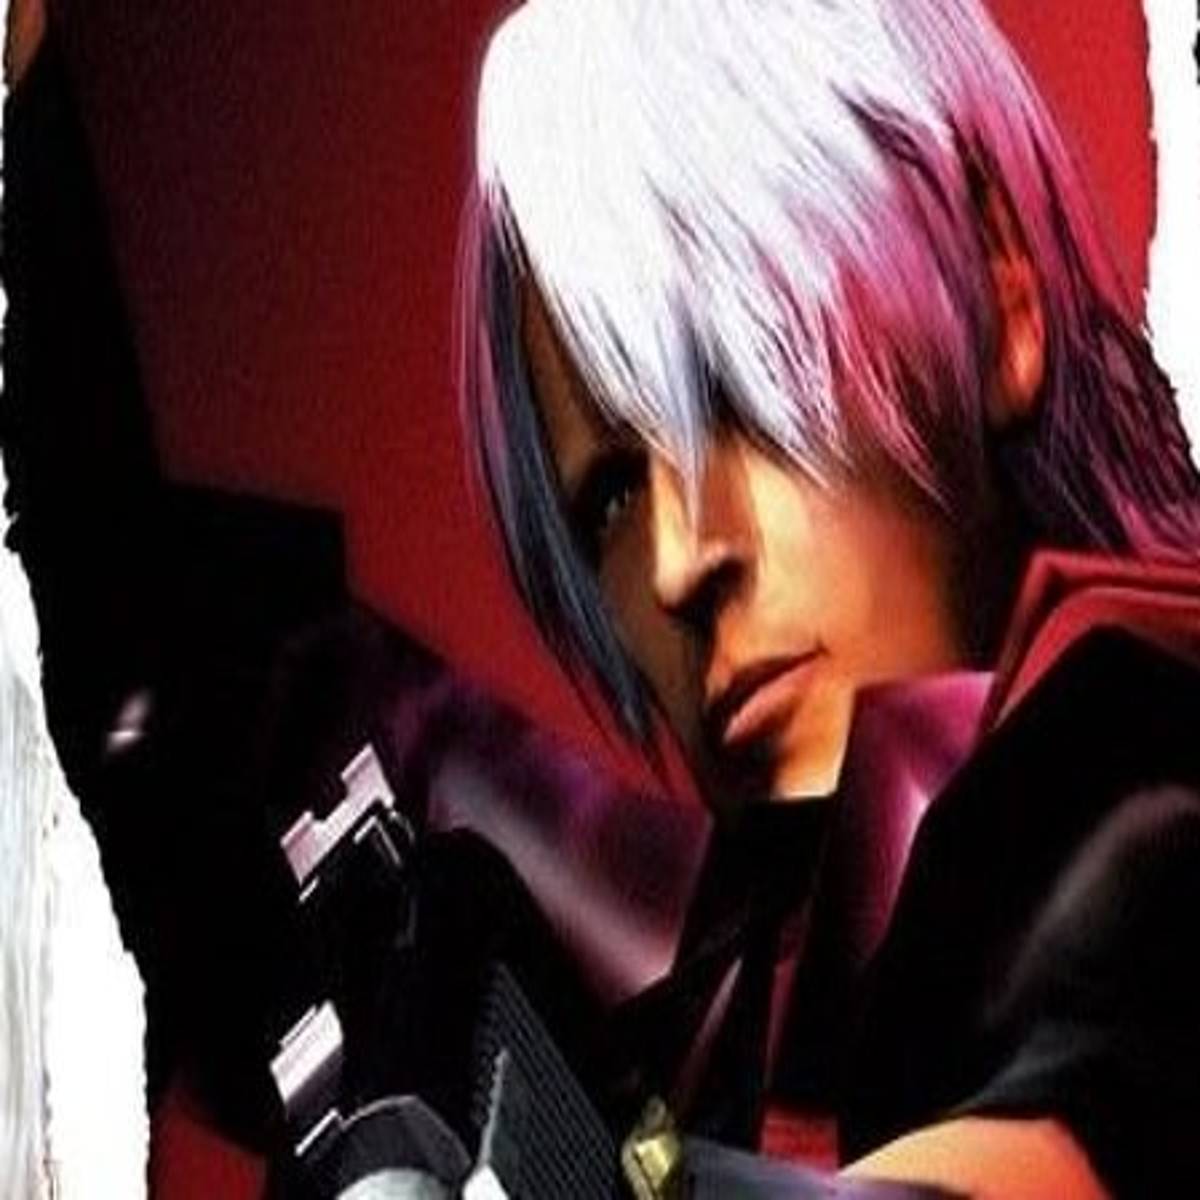 For those of who can stomach playing Devil May Cry 2, who would